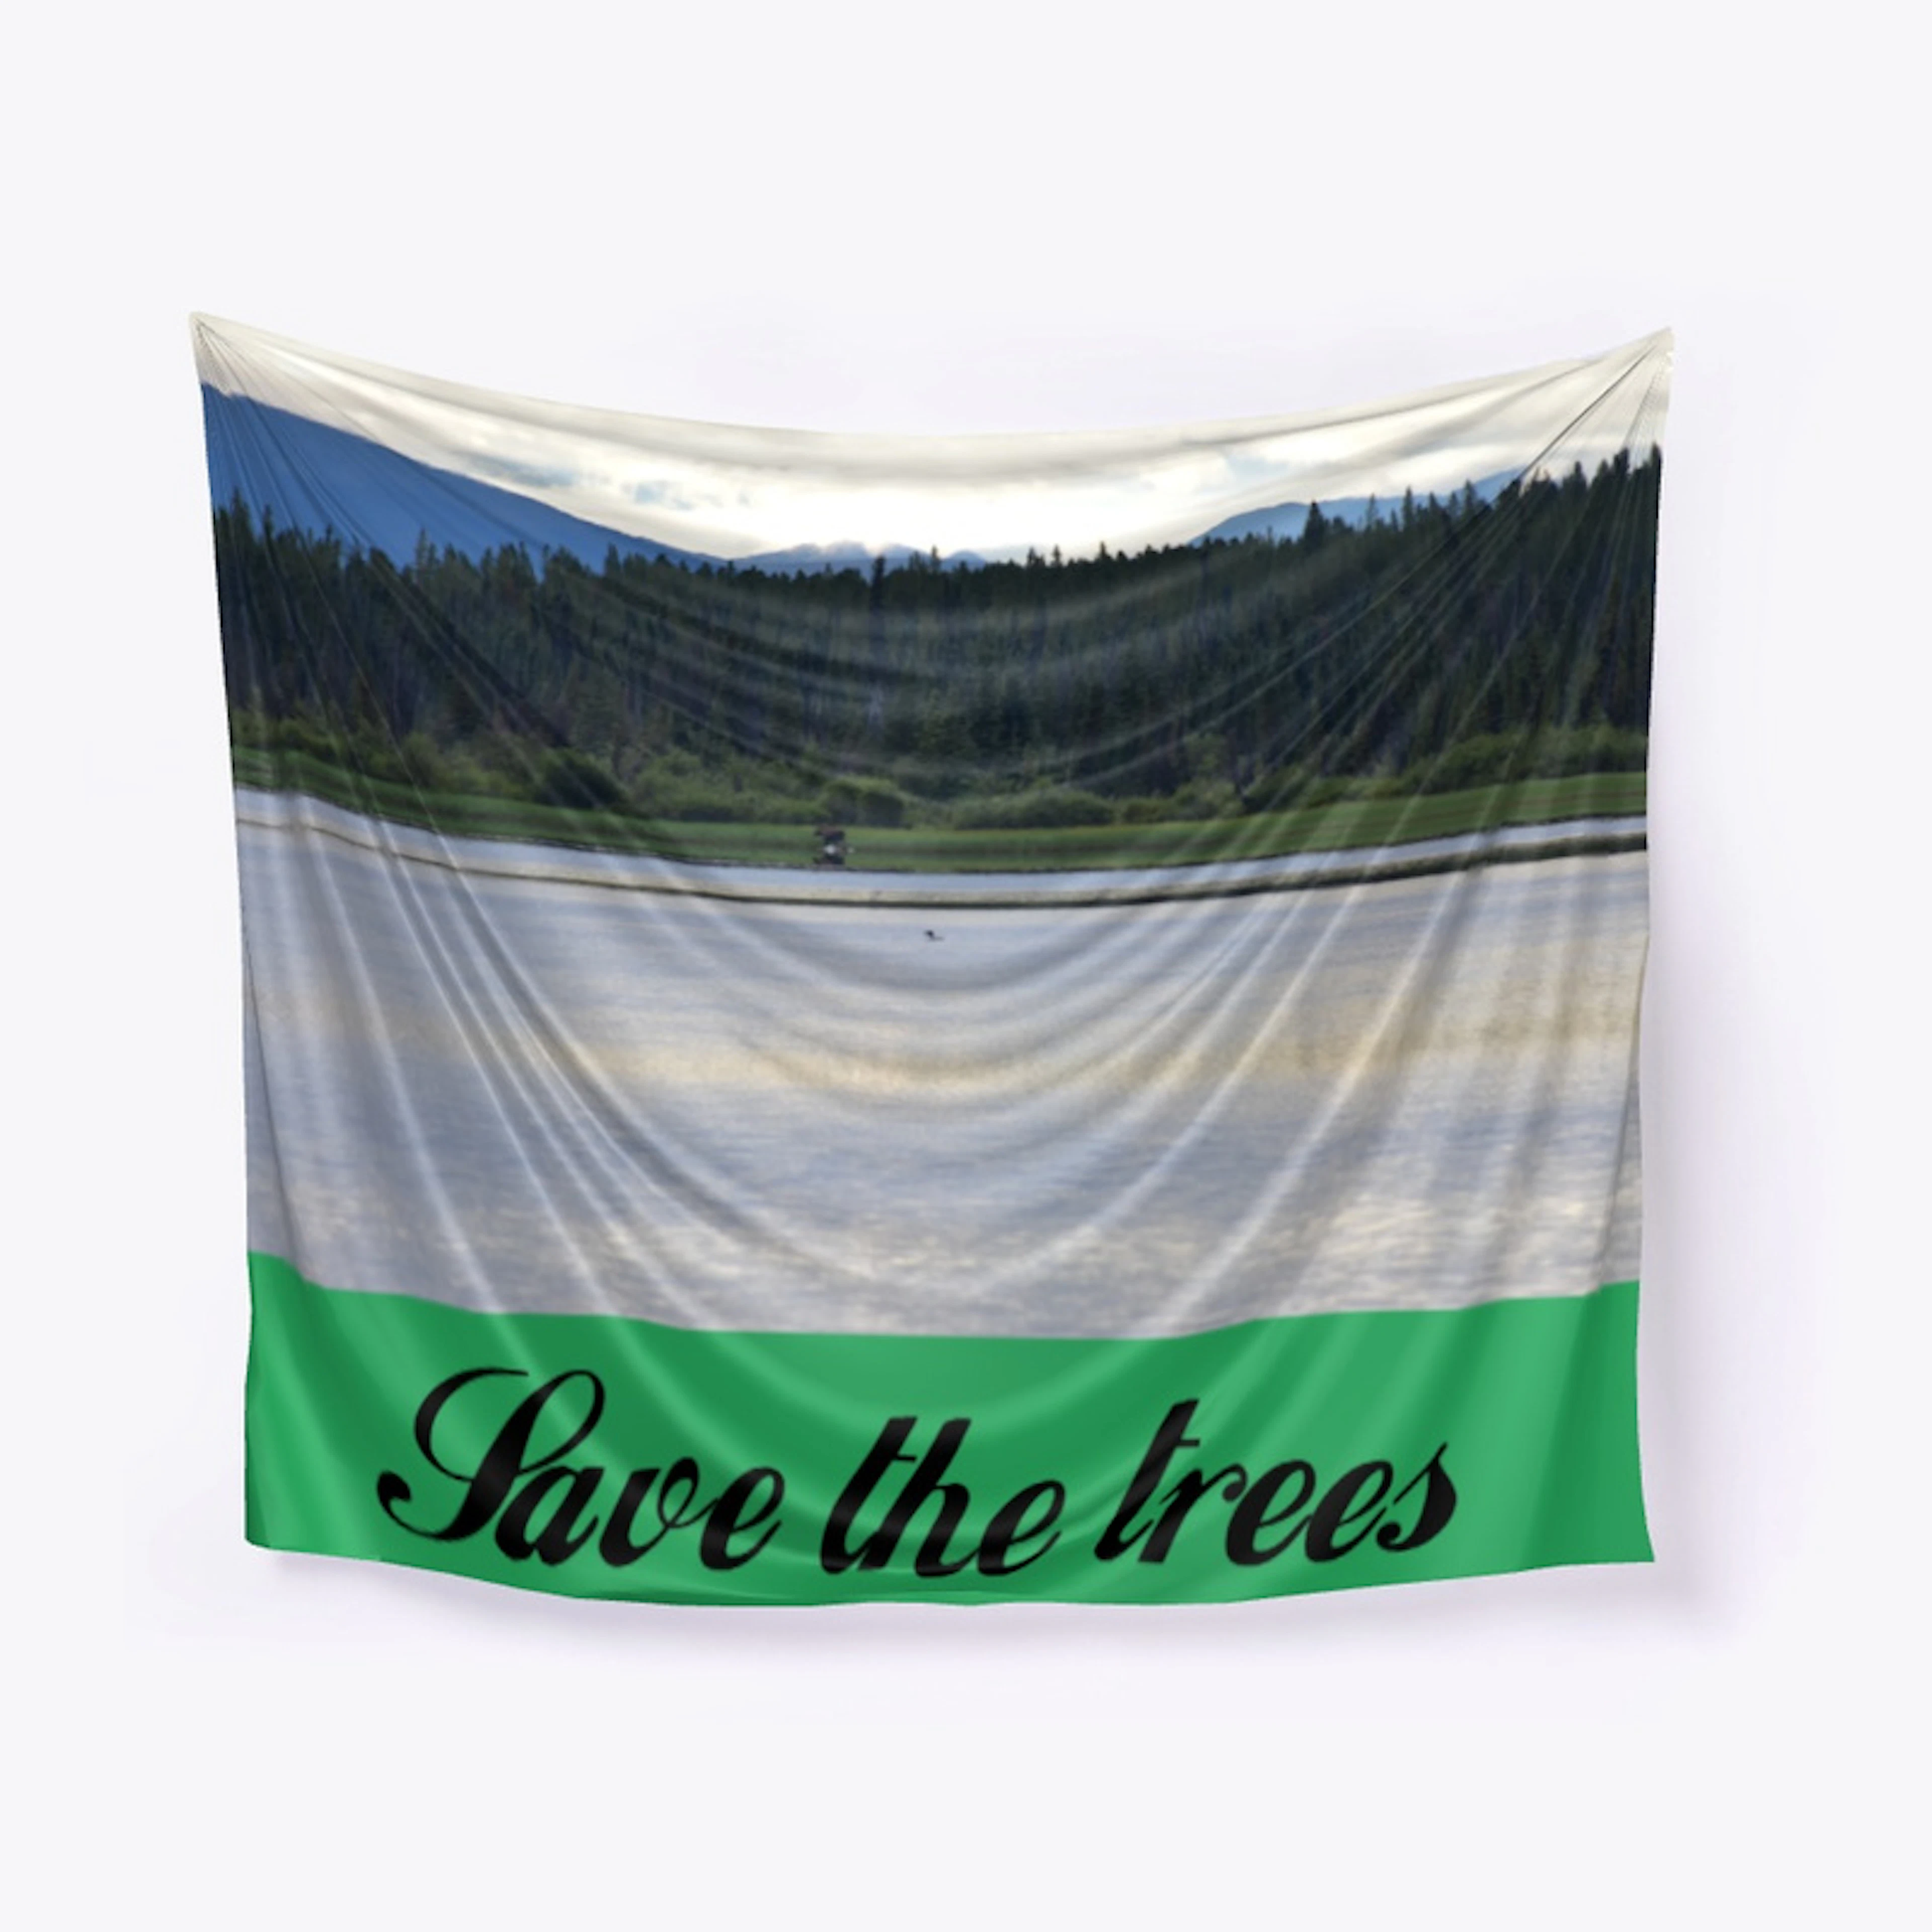 Save the trees